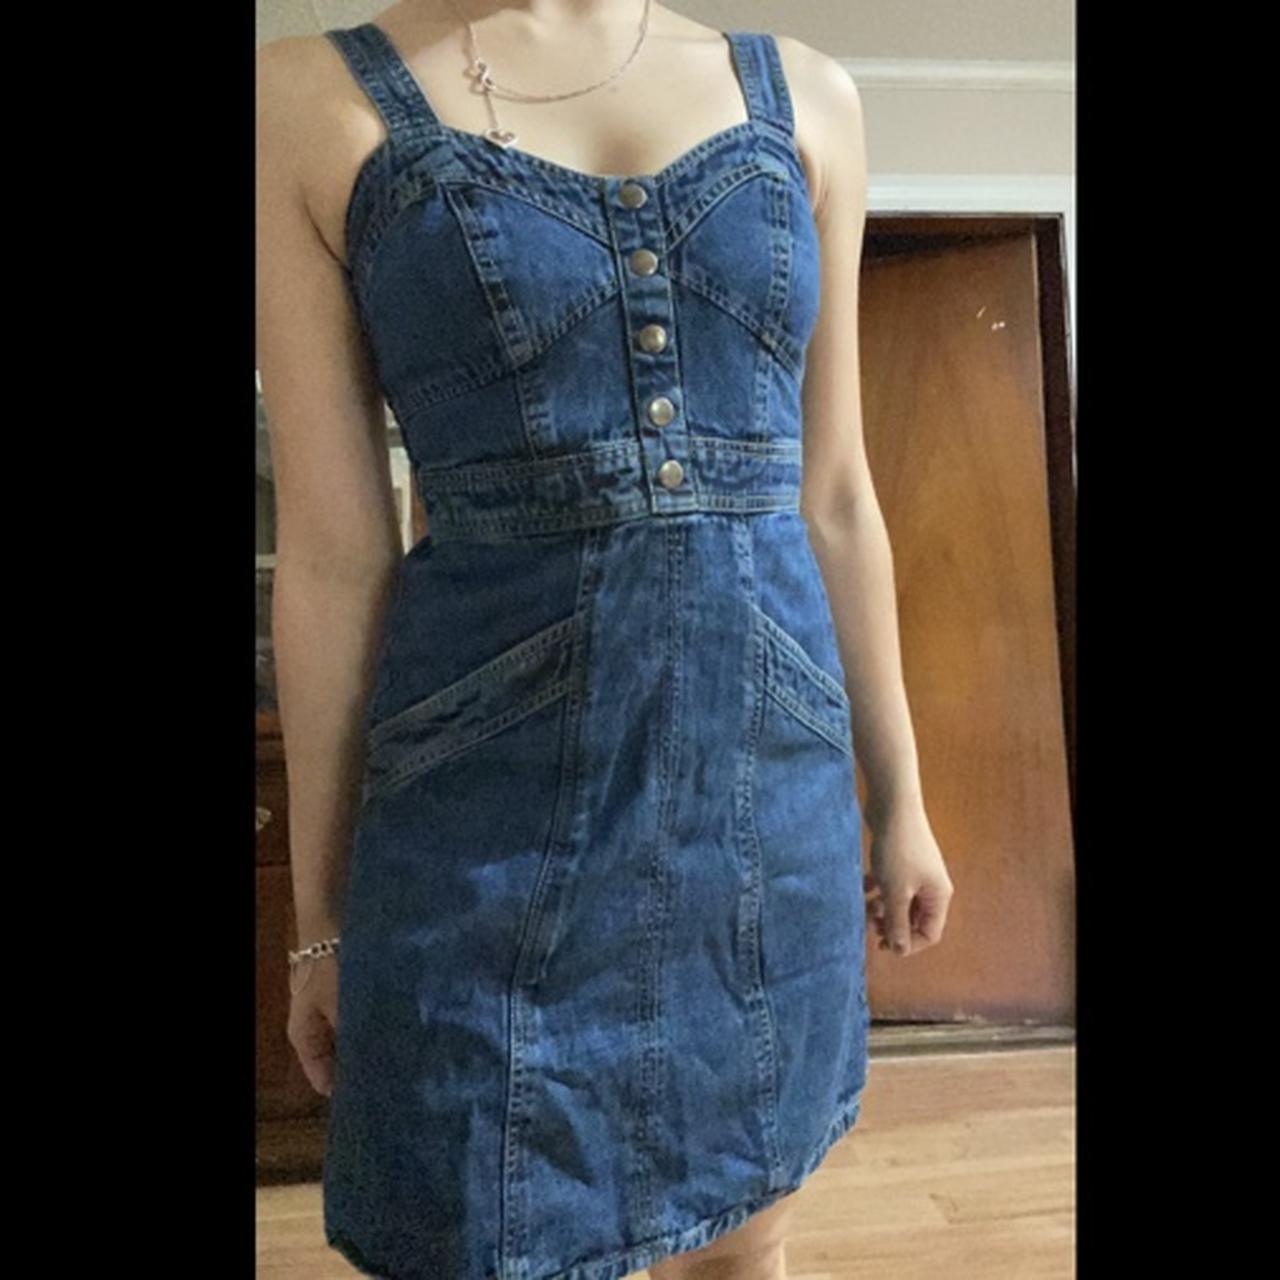 Jean dress with pocket
</p>
<div class='sfsiaftrpstwpr'><div class='sfsi_responsive_icons' style='display:block;margin-top:10px; margin-bottom: 10px; width:100%' data-icon-width-type='Fully responsive' data-icon-width-size='240' data-edge-type='Round' data-edge-radius='5'  ><div class='sfsi_icons_container sfsi_responsive_without_counter_icons sfsi_medium_button_container sfsi_icons_container_box_fully_container ' style='width:100%;display:flex; text-align:center;' ><a target='_blank' href='https://www.facebook.com/sharer/sharer.php?u=https%3A%2F%2Fwww.dresses2022.com%2FJapna-Denim-Dress%2F' style='display:block;text-align:center;margin-left:10px;  flex-basis:100%;' class=sfsi_responsive_fluid ><div class='sfsi_responsive_icon_item_container sfsi_responsive_icon_facebook_container sfsi_medium_button sfsi_responsive_icon_gradient sfsi_centered_icon' style=' border-radius:5px; width:auto; ' ><img style='max-height: 25px;display:unset;margin:0' class='sfsi_wicon' alt='facebook' src='https://www.dresses2022.com/wp-content/plugins/ultimate-social-media-icons/images/responsive-icon/facebook.svg'><span style='color:#fff'>Share on Facebook</span></div></a><a target='_blank' href='https://twitter.com/intent/tweet?text=Hey%2C+check+out+this+cool+site+I+found%3A+www.yourname.com+%23Topic+via%40my_twitter_name&url=https%3A%2F%2Fwww.dresses2022.com%2FJapna-Denim-Dress%2F' style='display:block;text-align:center;margin-left:10px;  flex-basis:100%;' class=sfsi_responsive_fluid ><div class='sfsi_responsive_icon_item_container sfsi_responsive_icon_twitter_container sfsi_medium_button sfsi_responsive_icon_gradient sfsi_centered_icon' style=' border-radius:5px; width:auto; ' ><img style='max-height: 25px;display:unset;margin:0' class='sfsi_wicon' alt='Twitter' src='https://www.dresses2022.com/wp-content/plugins/ultimate-social-media-icons/images/responsive-icon/Twitter.svg'><span style='color:#fff'>Tweet</span></div></a><a target='_blank' href='https://follow.it/now' style='display:block;text-align:center;margin-left:10px;  flex-basis:100%;' class=sfsi_responsive_fluid ><div class='sfsi_responsive_icon_item_container sfsi_responsive_icon_follow_container sfsi_medium_button sfsi_responsive_icon_gradient sfsi_centered_icon' style=' border-radius:5px; width:auto; ' ><img style='max-height: 25px;display:unset;margin:0' class='sfsi_wicon' alt='Follow' src='https://www.dresses2022.com/wp-content/plugins/ultimate-social-media-icons/images/responsive-icon/Follow.png'><span style='color:#fff'>Follow us</span></div></a><a target='_blank' href='https://www.pinterest.com/pin/create/link/?url=https%3A%2F%2Fwww.dresses2022.com%2FJapna-Denim-Dress%2F' style='display:block;text-align:center;margin-left:10px;  flex-basis:100%;' class=sfsi_responsive_fluid ><div class='sfsi_responsive_icon_item_container sfsi_responsive_icon_pinterest_container sfsi_medium_button sfsi_responsive_icon_gradient sfsi_centered_icon' style=' border-radius:5px; width:auto; ' ><img style='max-height: 25px;display:unset;margin:0' class='sfsi_wicon' alt='Pinterest' src='https://www.dresses2022.com/wp-content/plugins/ultimate-social-media-icons/images/responsive-icon/Pinterest.svg'><span style='color:#fff'>Save</span></div></a></div></div></div><!--end responsive_icons-->	</div>
	
	<footer class=